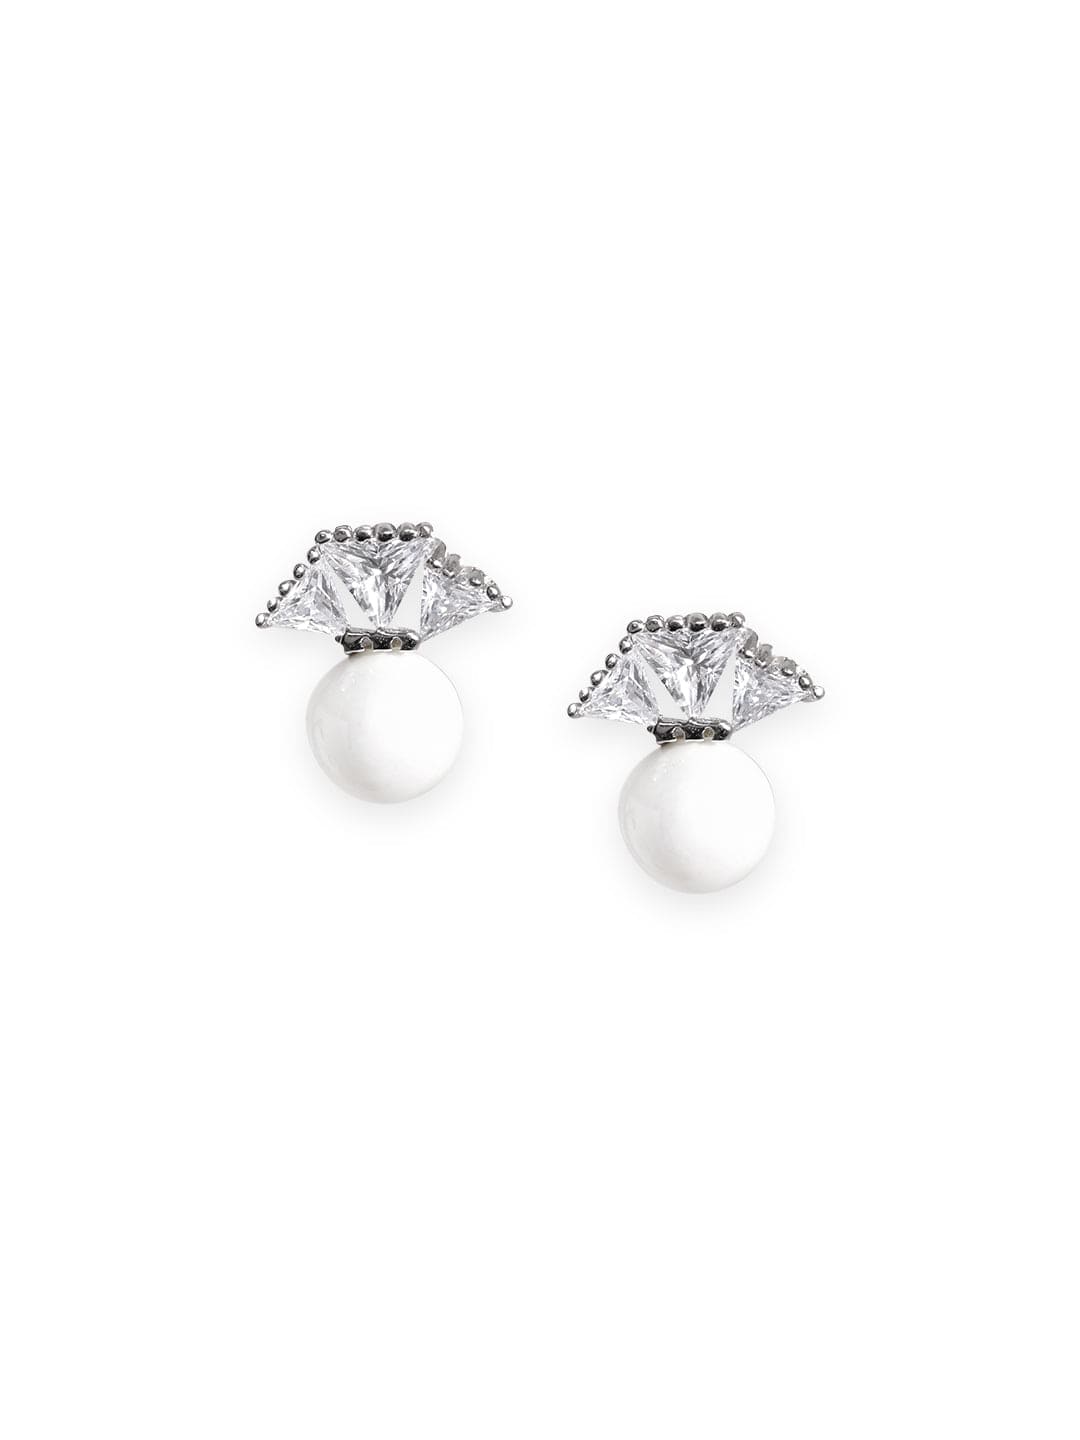 Rubans Silver AD and Pearl Accent Sterling Silver Stud Earrings Earrings